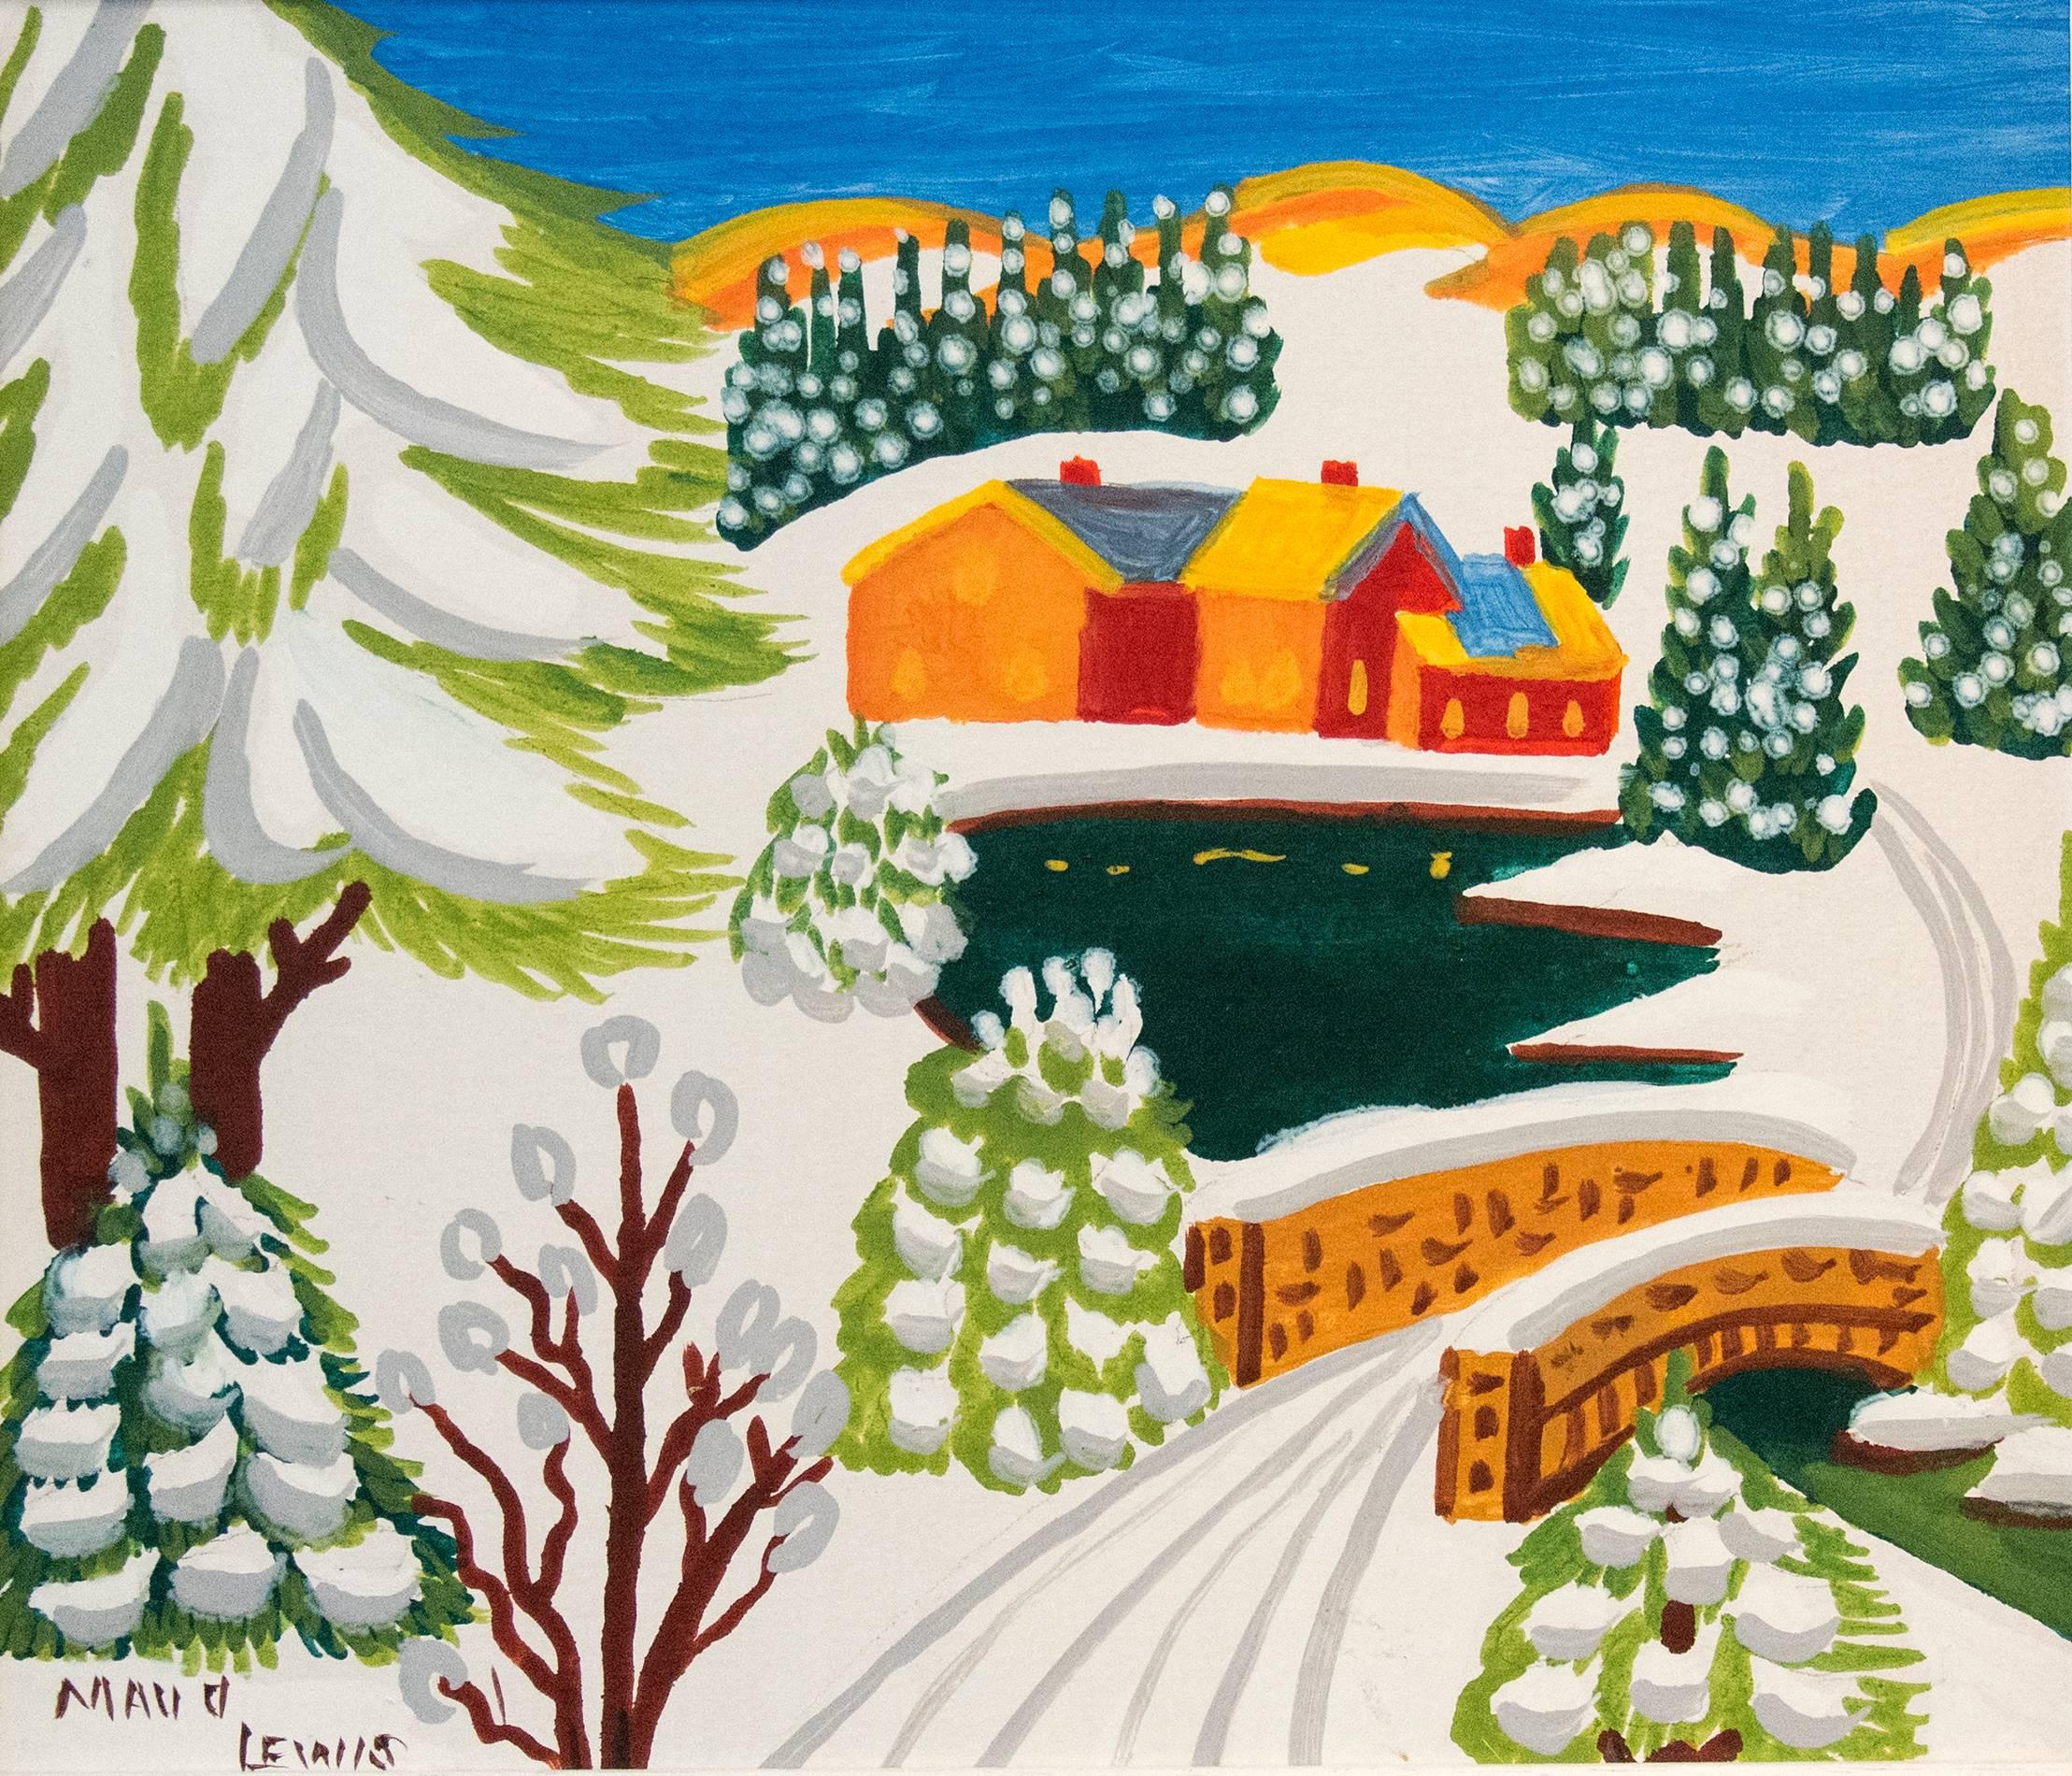 Snow-laden Landscape - Painting by Maud Lewis